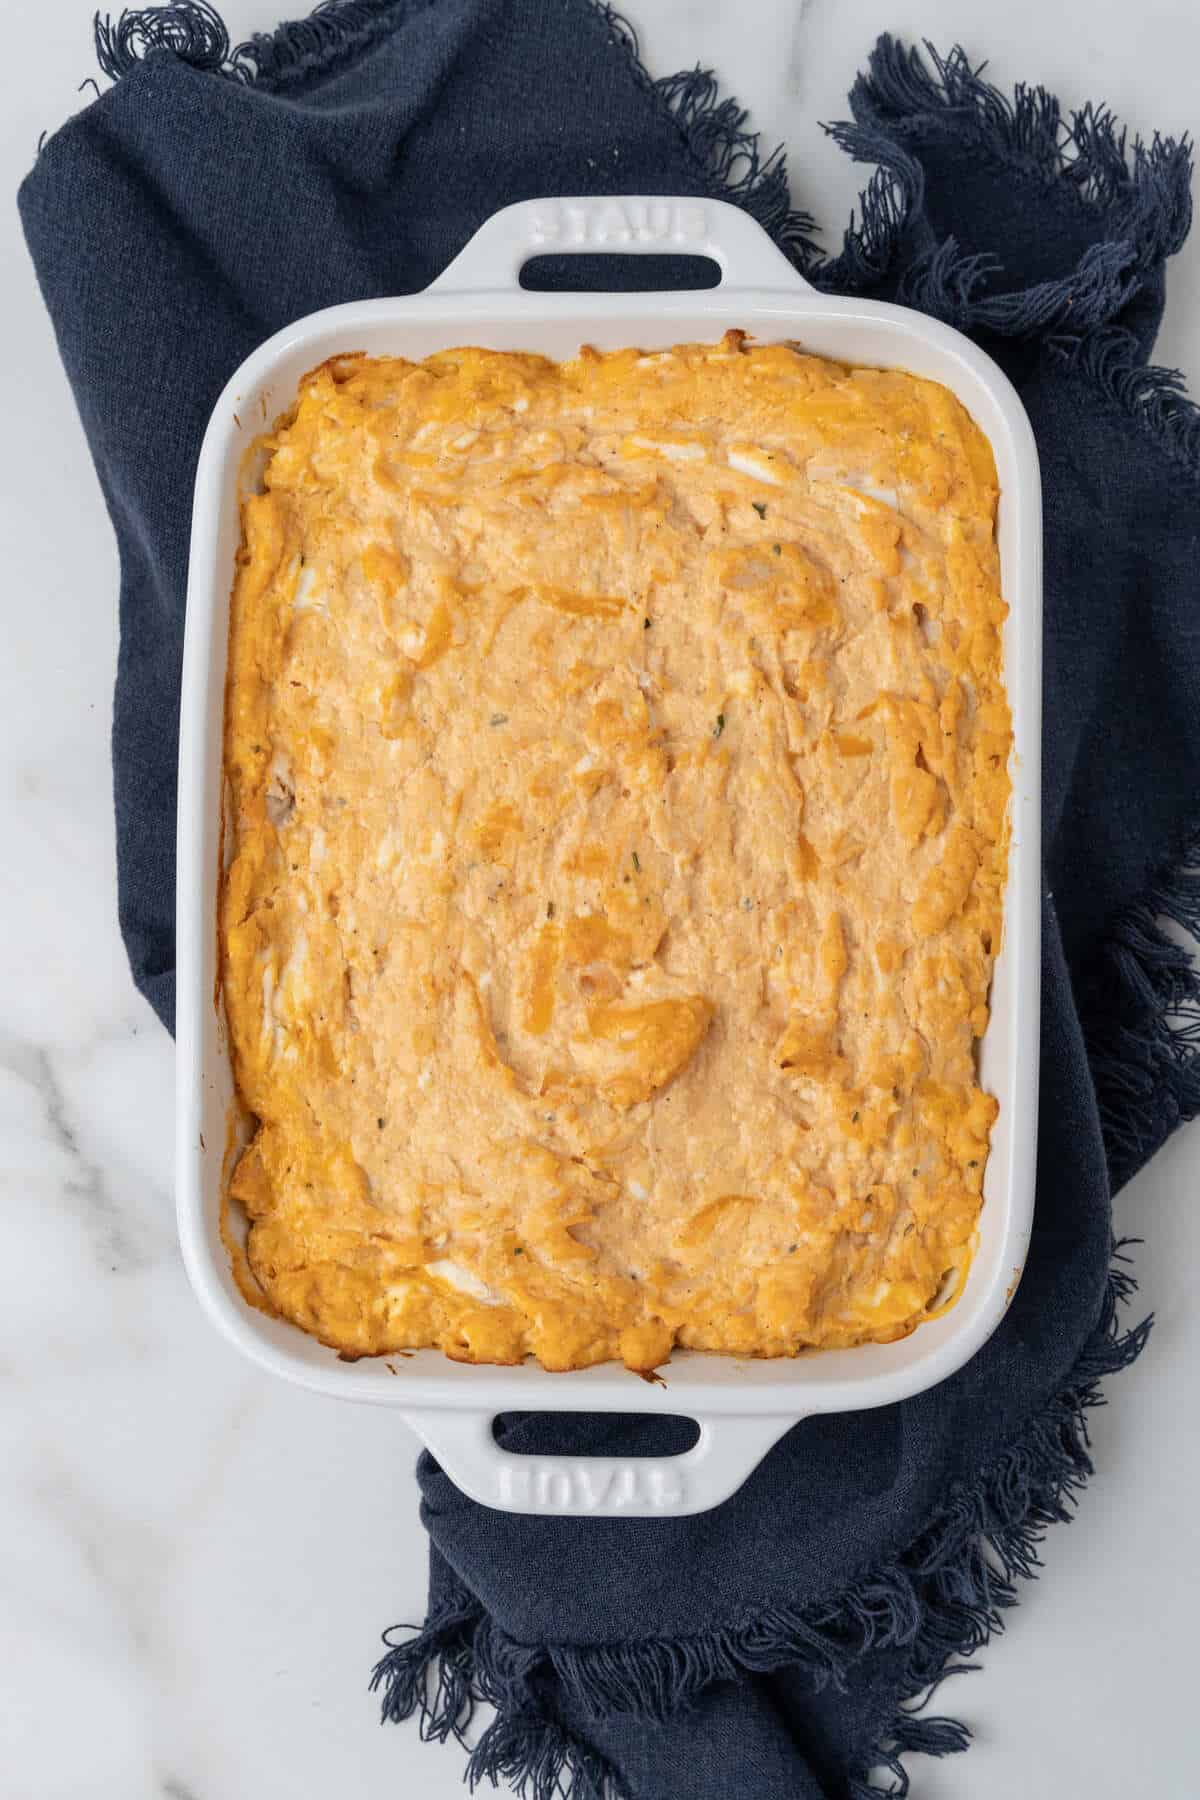 Cheesy buffalo chicken dip in a white dish with a blue napkin.